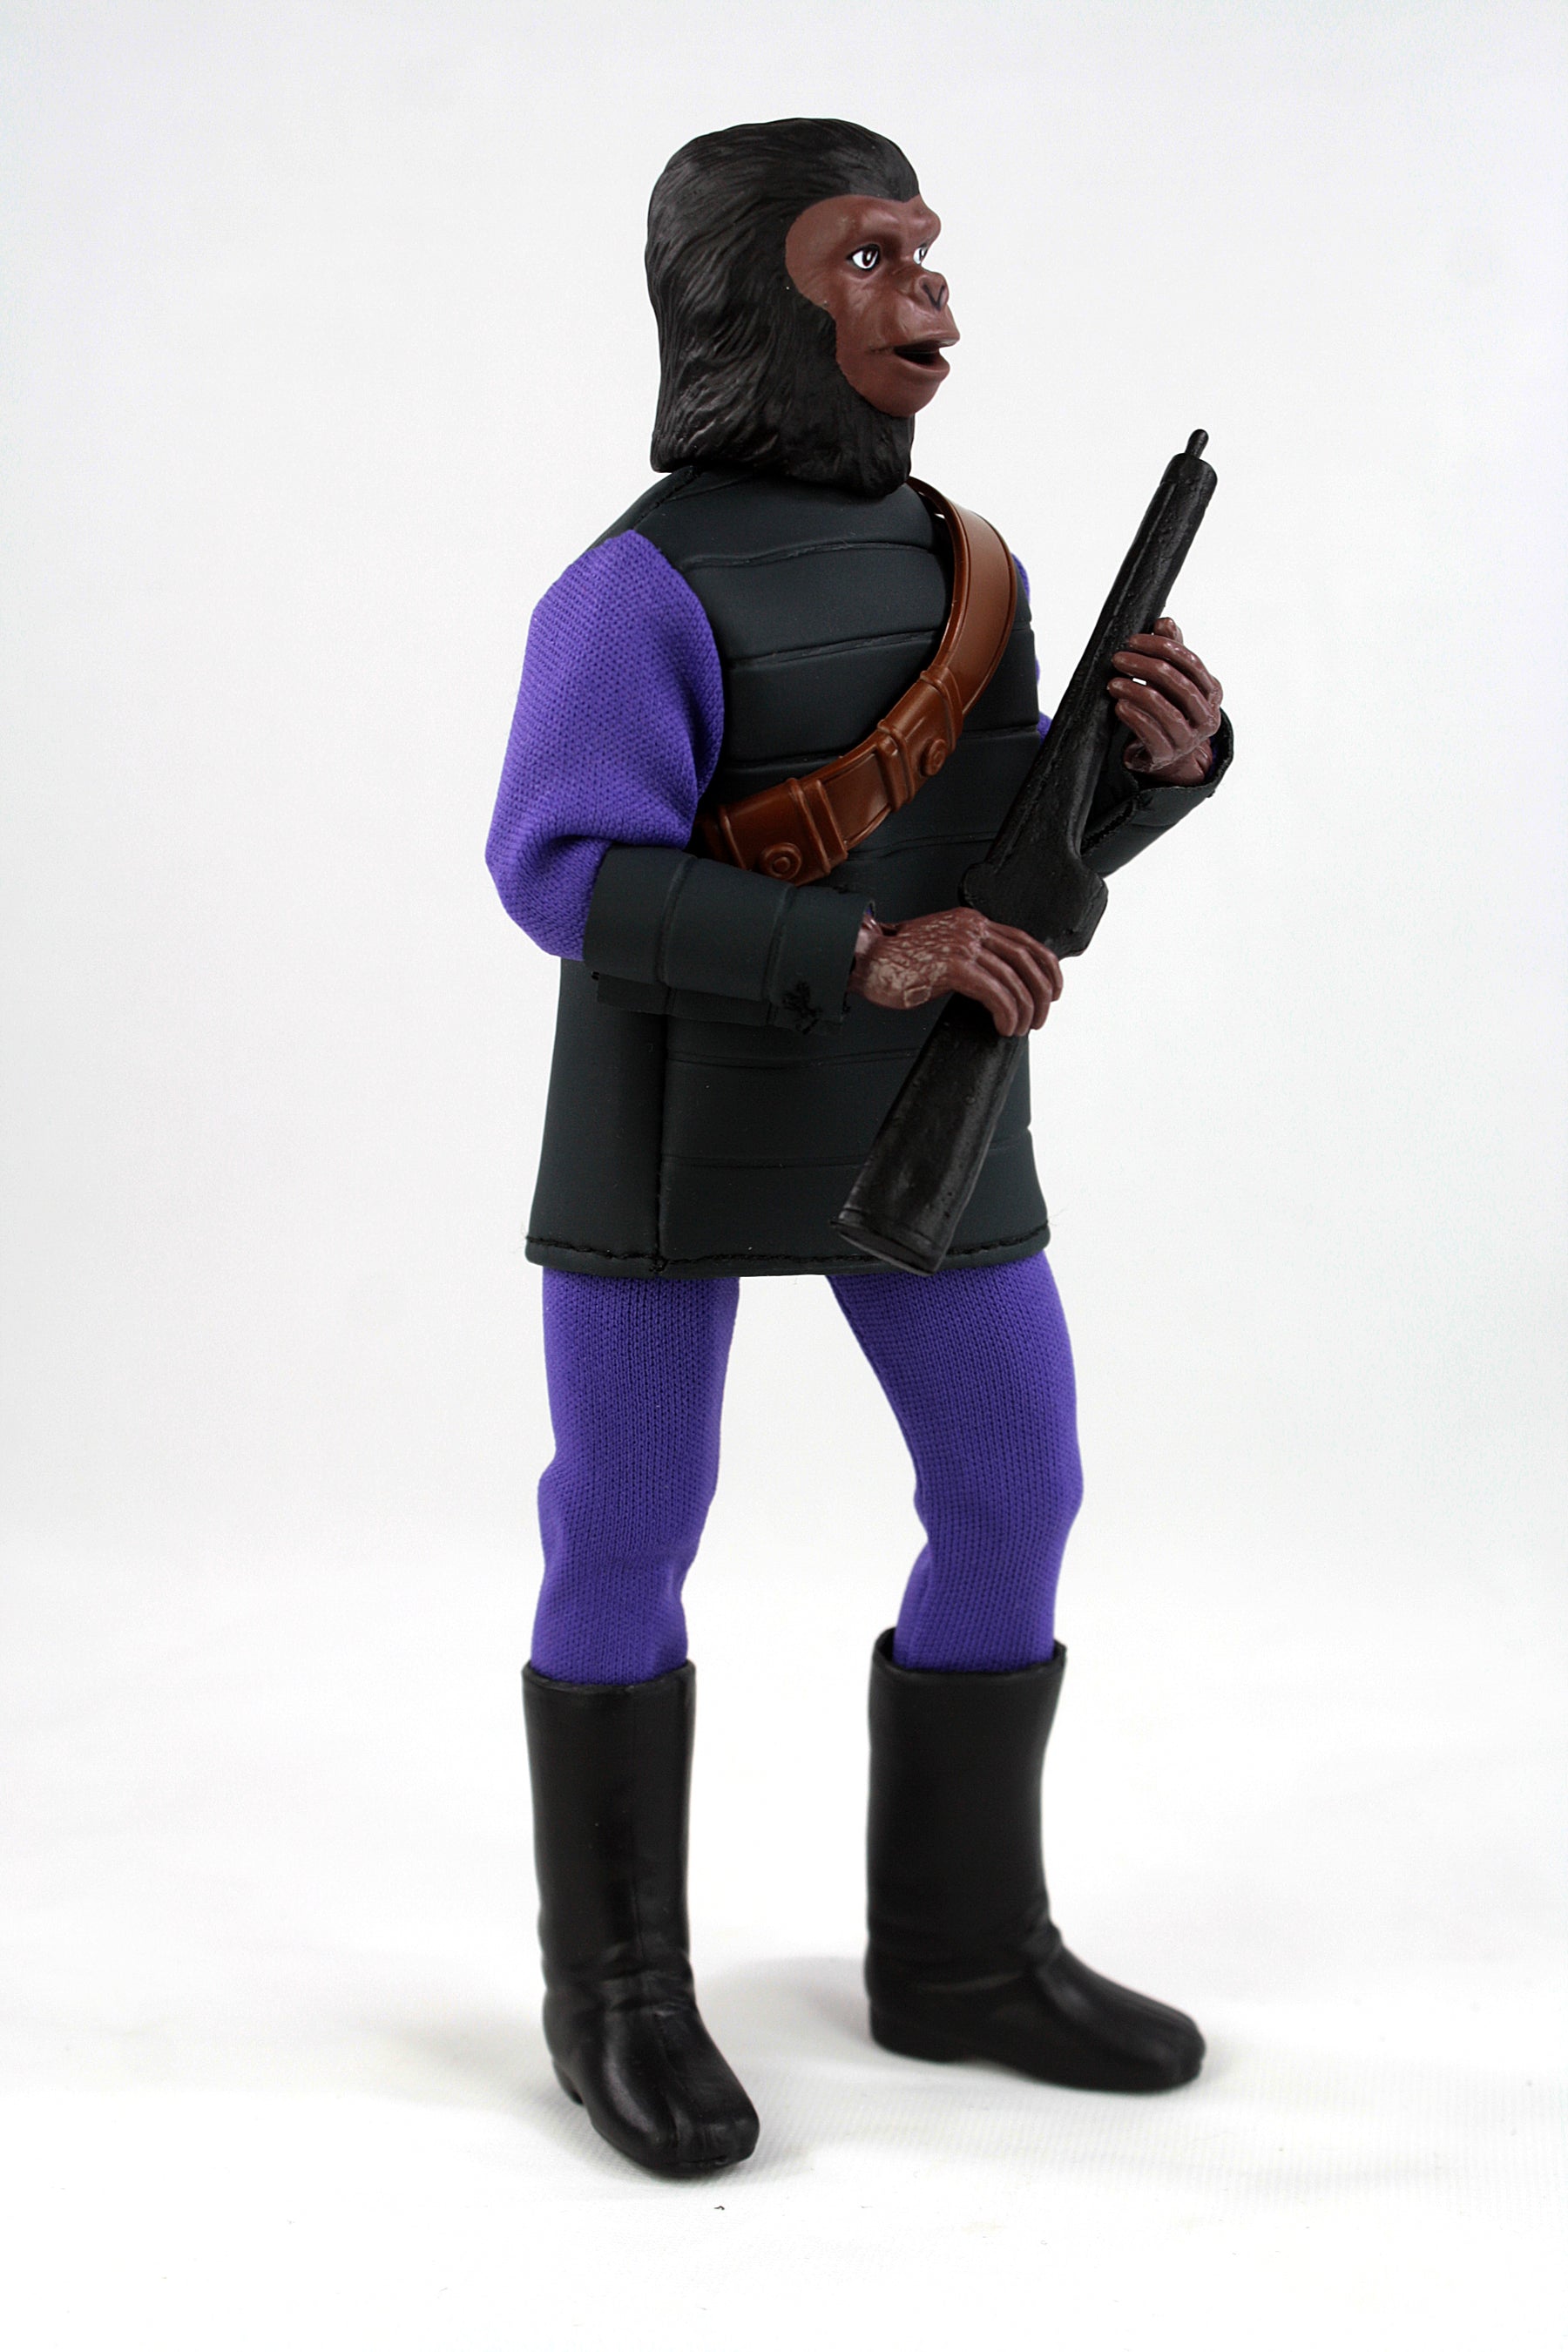 Mego Planet of The Apes Wave 14 - Soldier Ape with Brown Bandolier 8" Action Figure - Zlc Collectibles